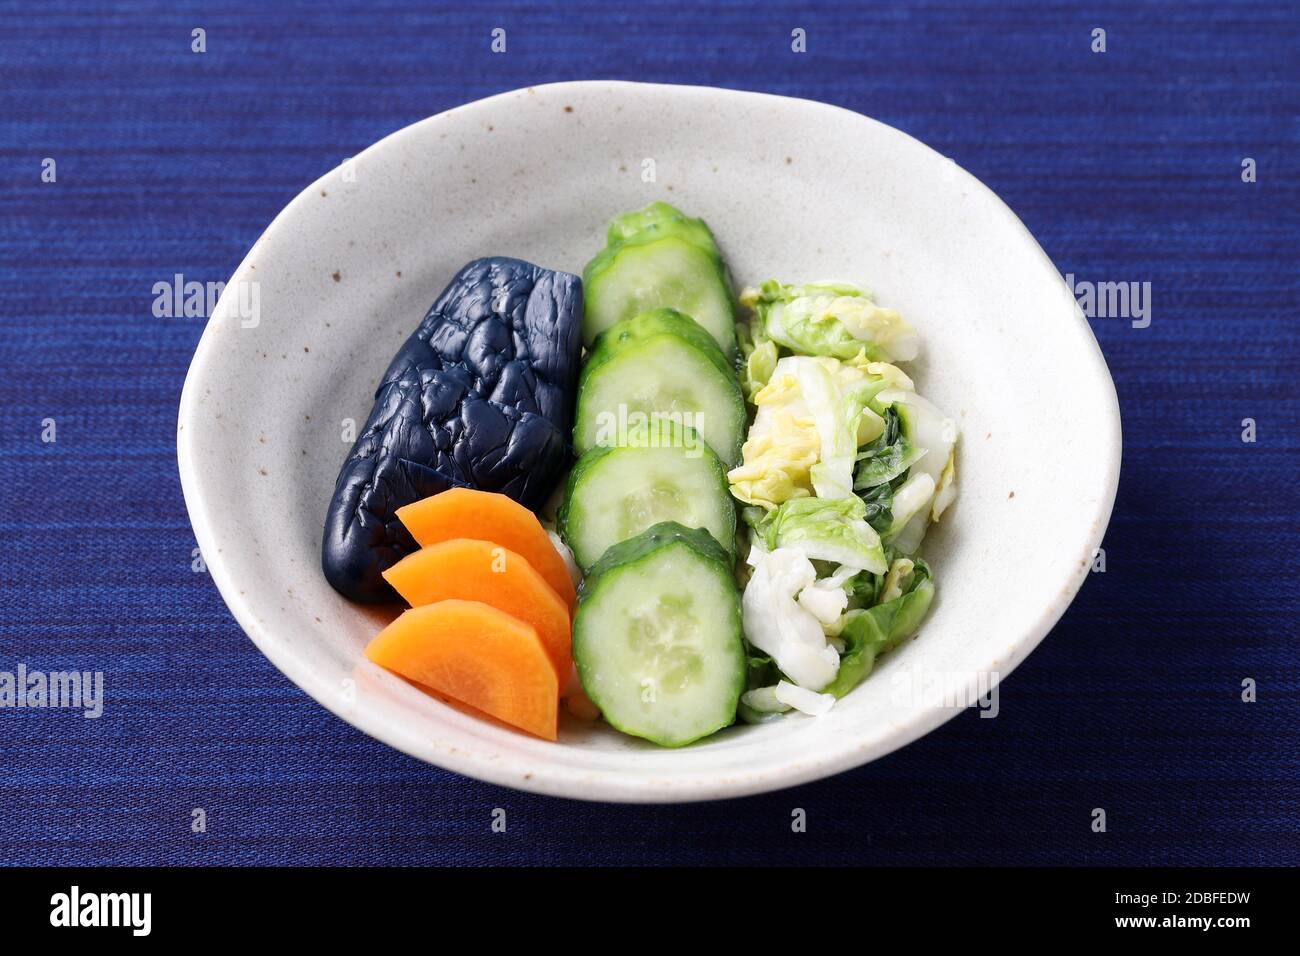 Japanese traditional food, Vegetables salt pickled tsukemono in a dish Stock Photo